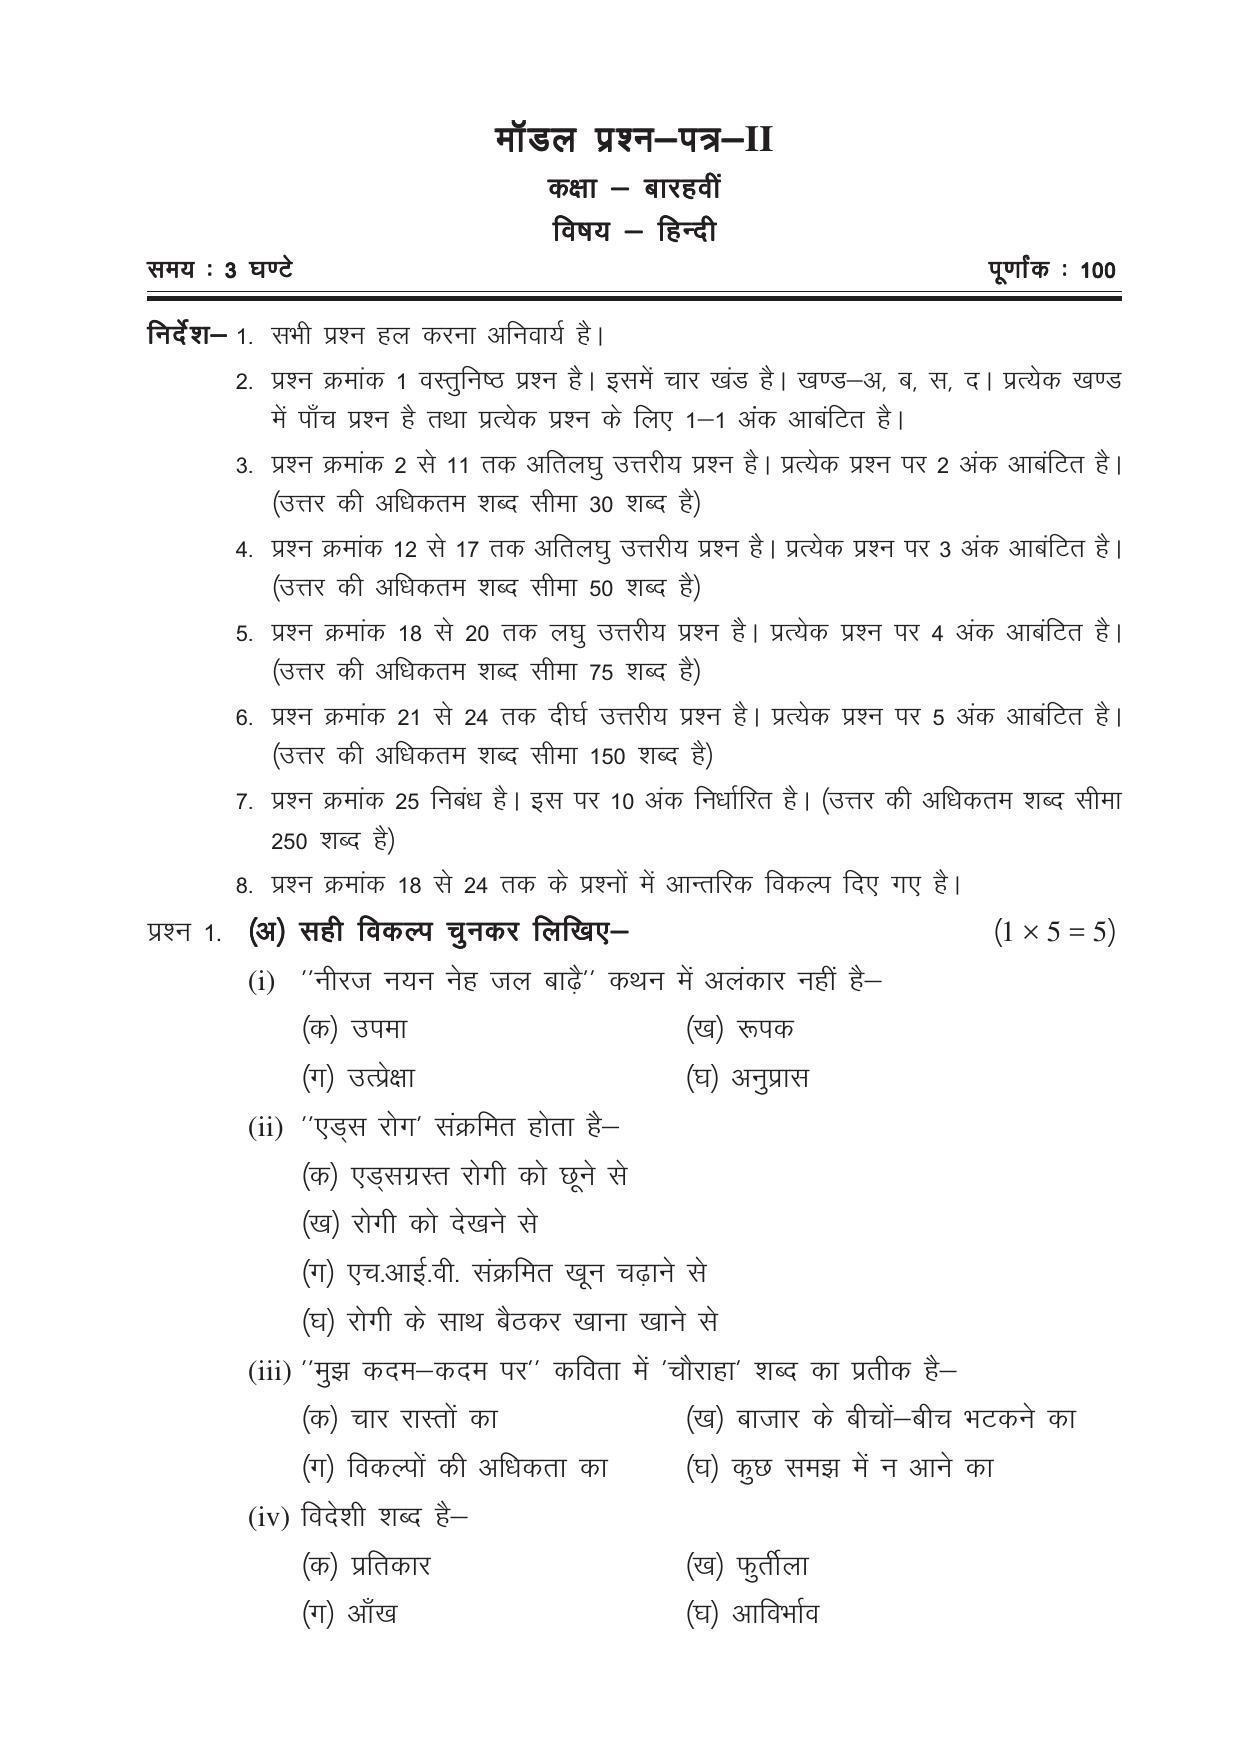 CGSOS Class 12 Model Question Paper - Hindi - II - Page 1